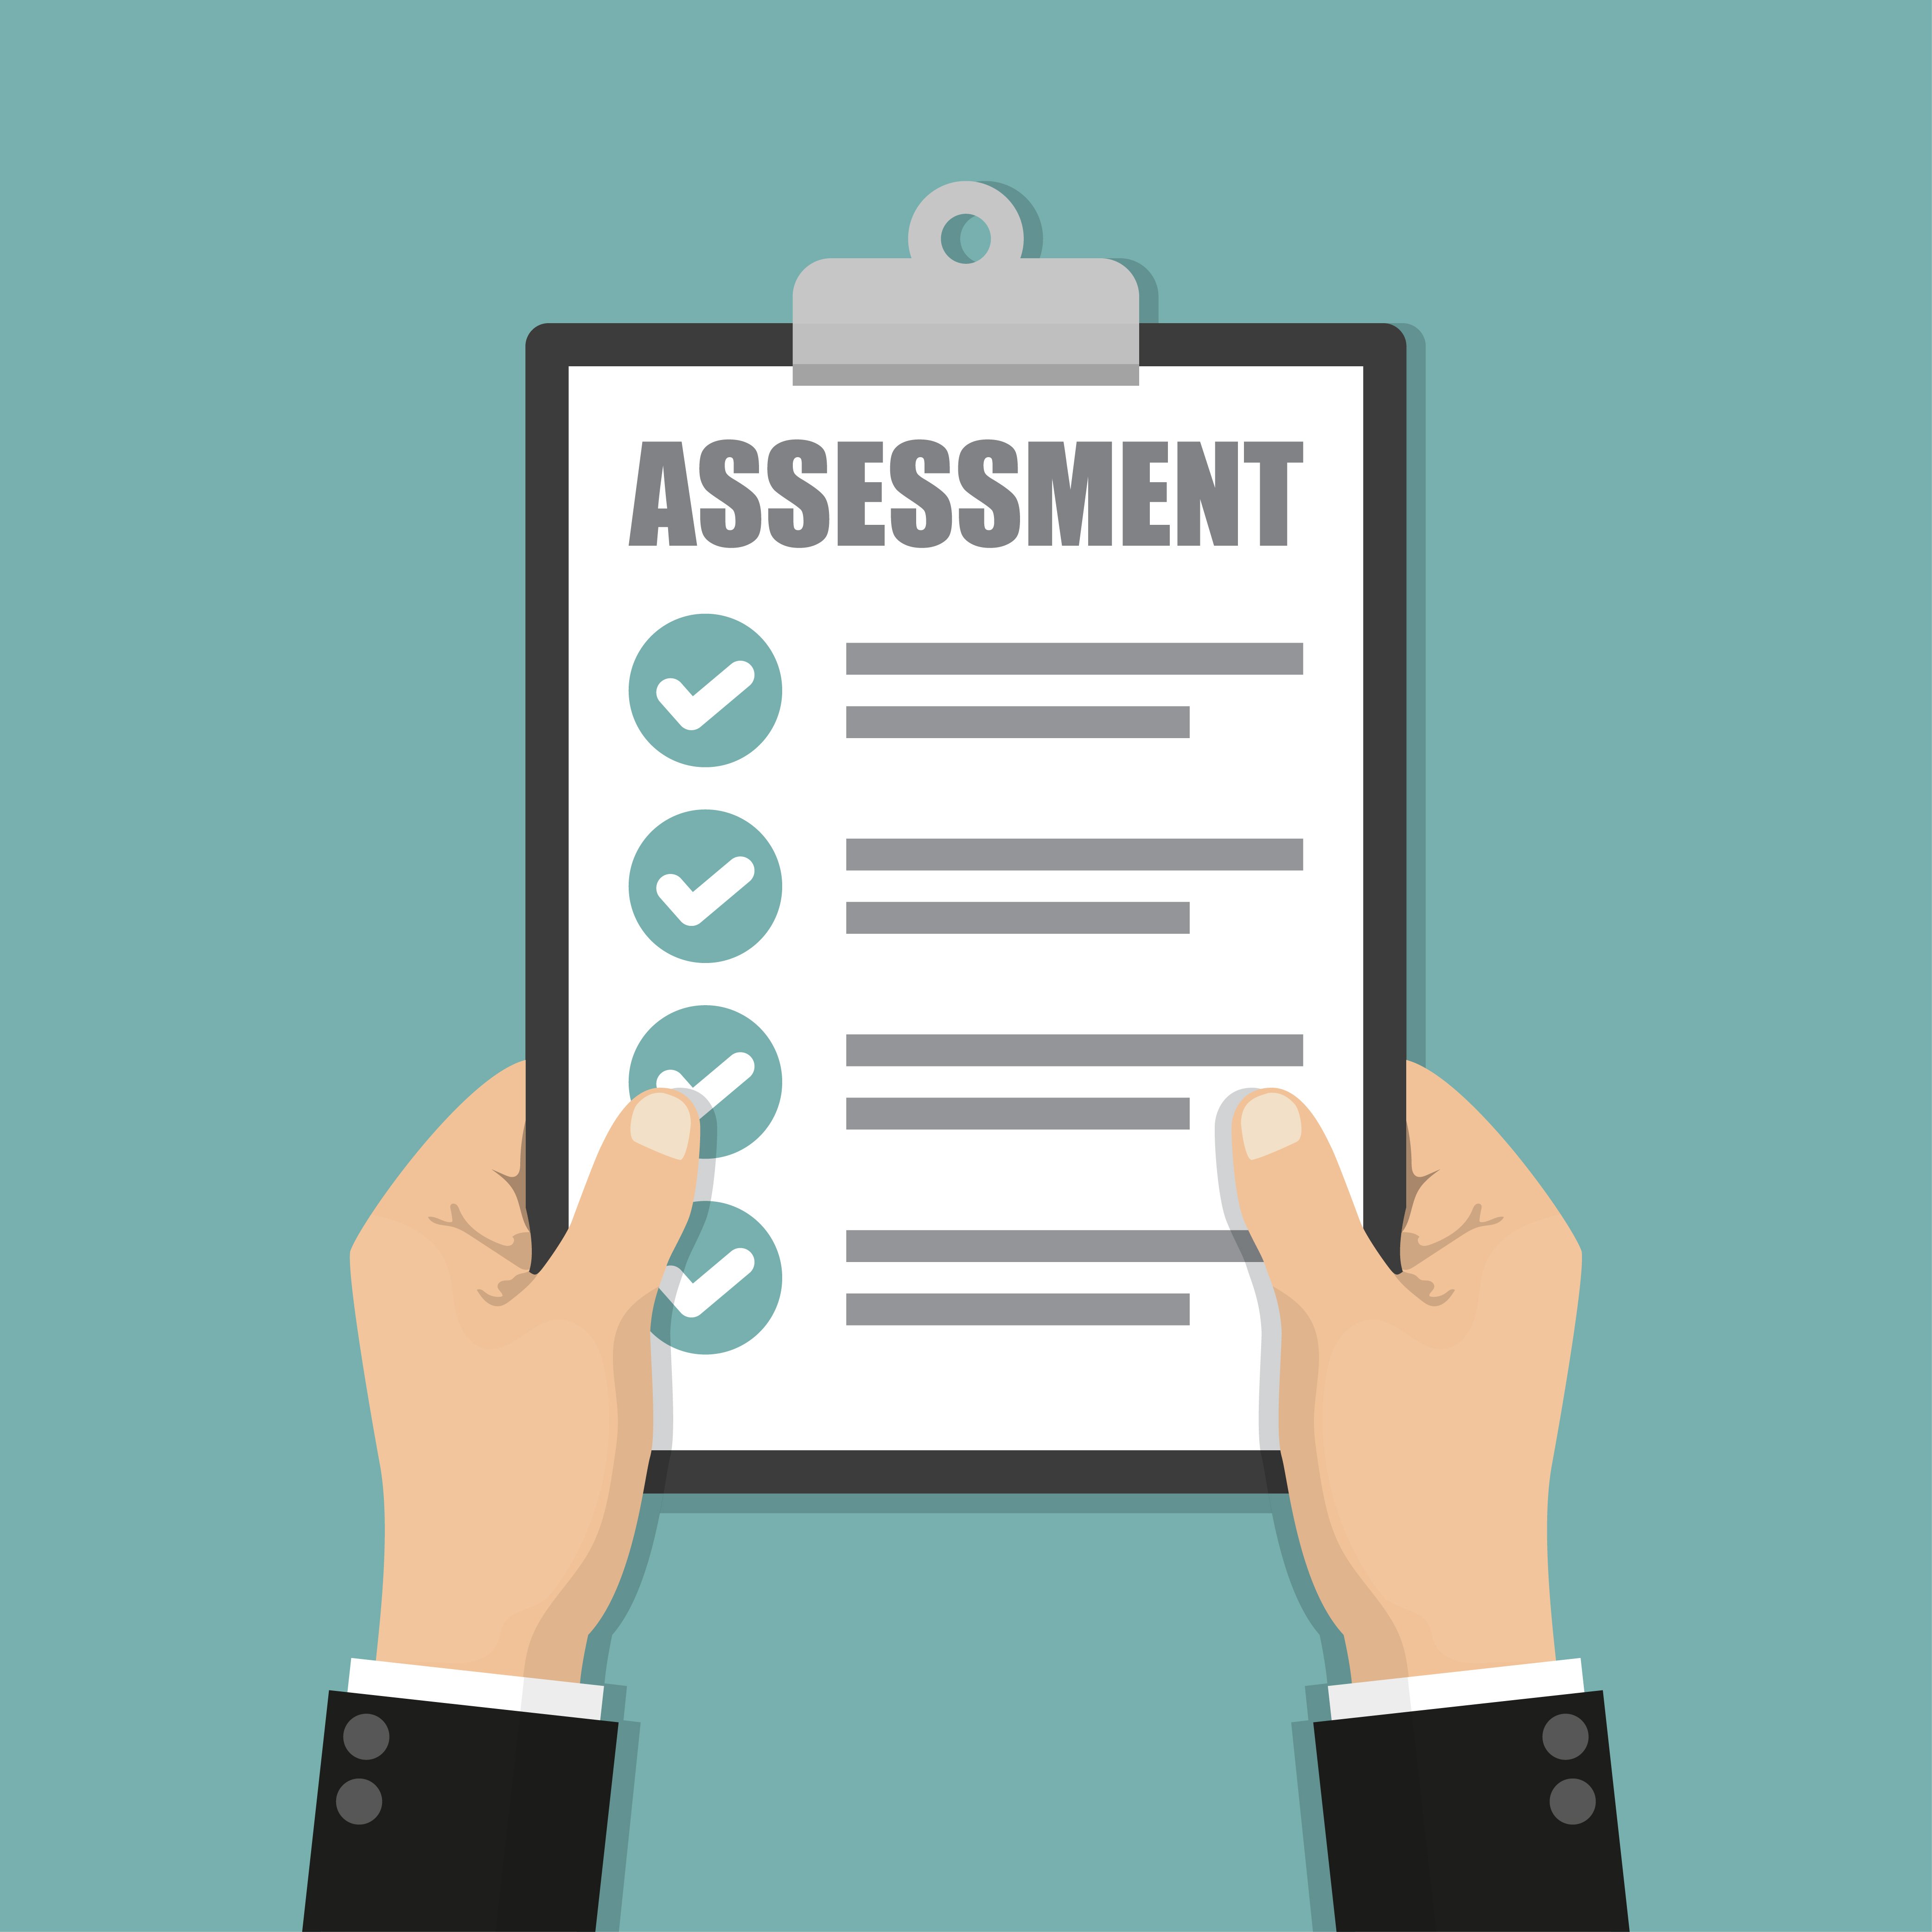 Are Leadership Assessment Tools Really Worth It?